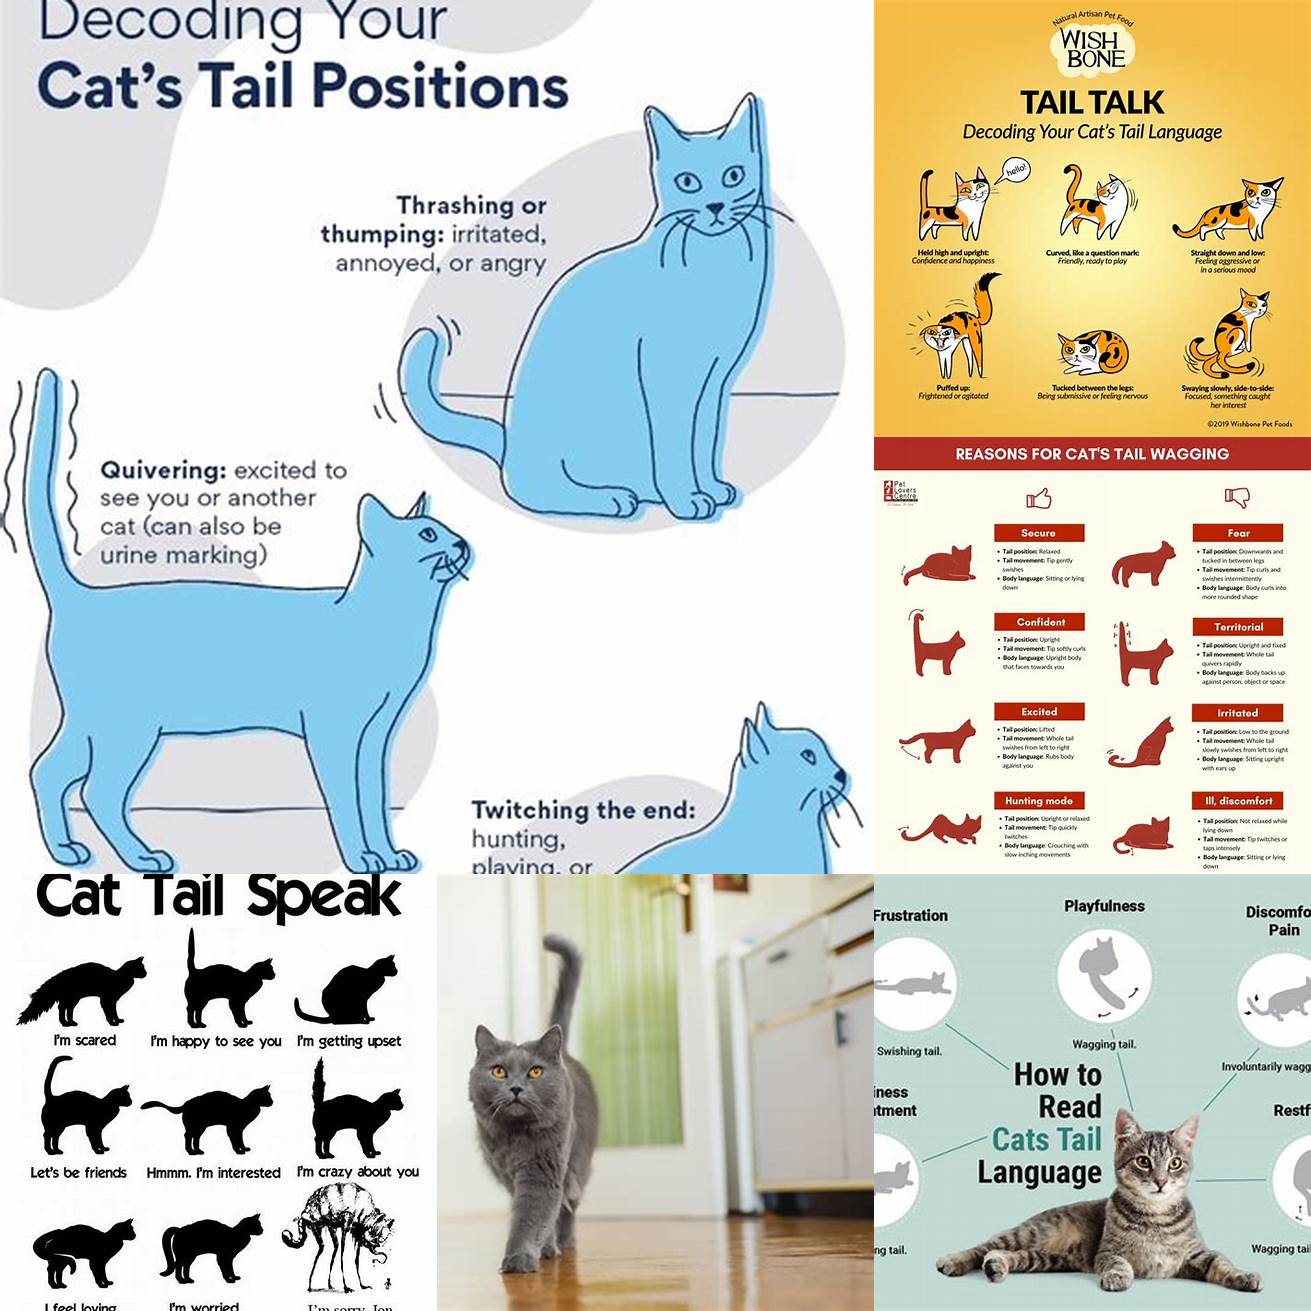 If your cats tail is flicking slowly back and forth it may be a sign of curiosity or alertness Your cat may be watching something intently or trying to locate a sound